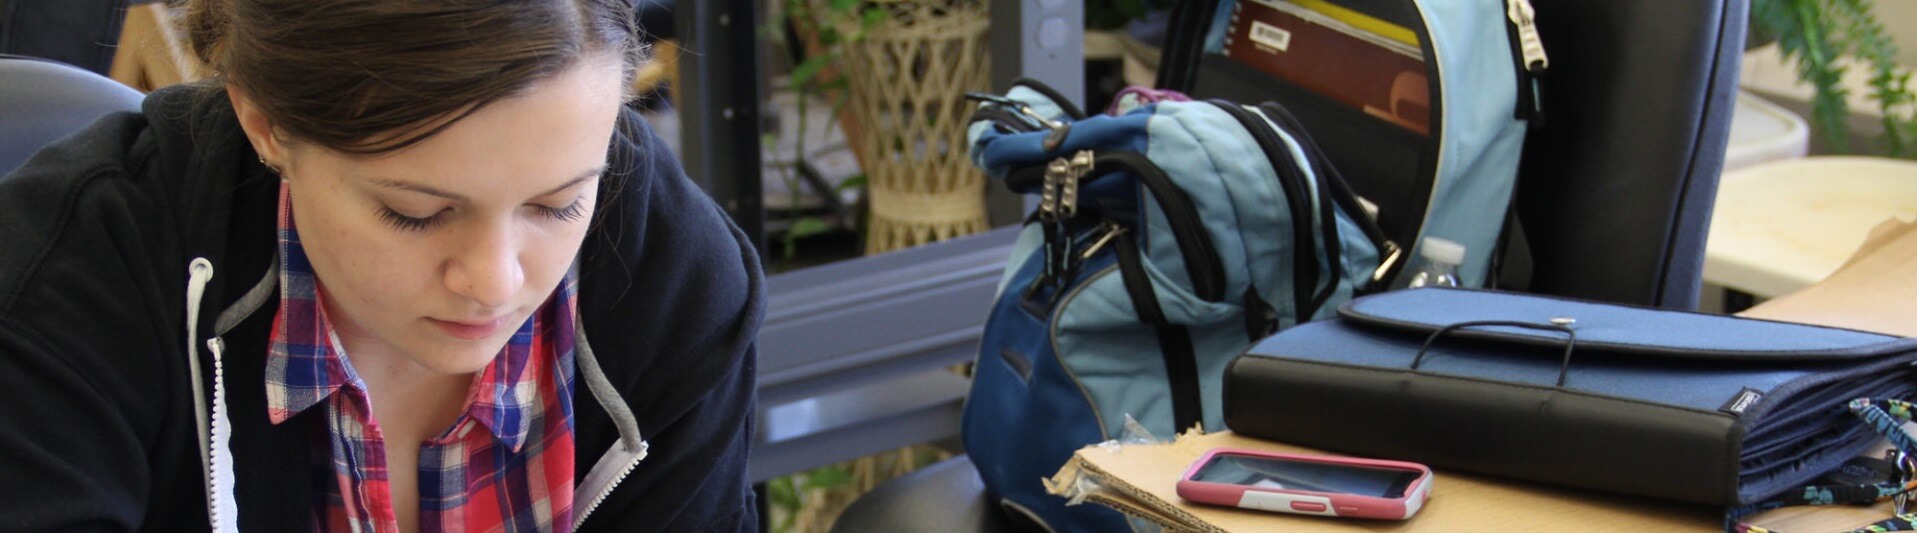 Student pauses at table for study notes with her open backpack